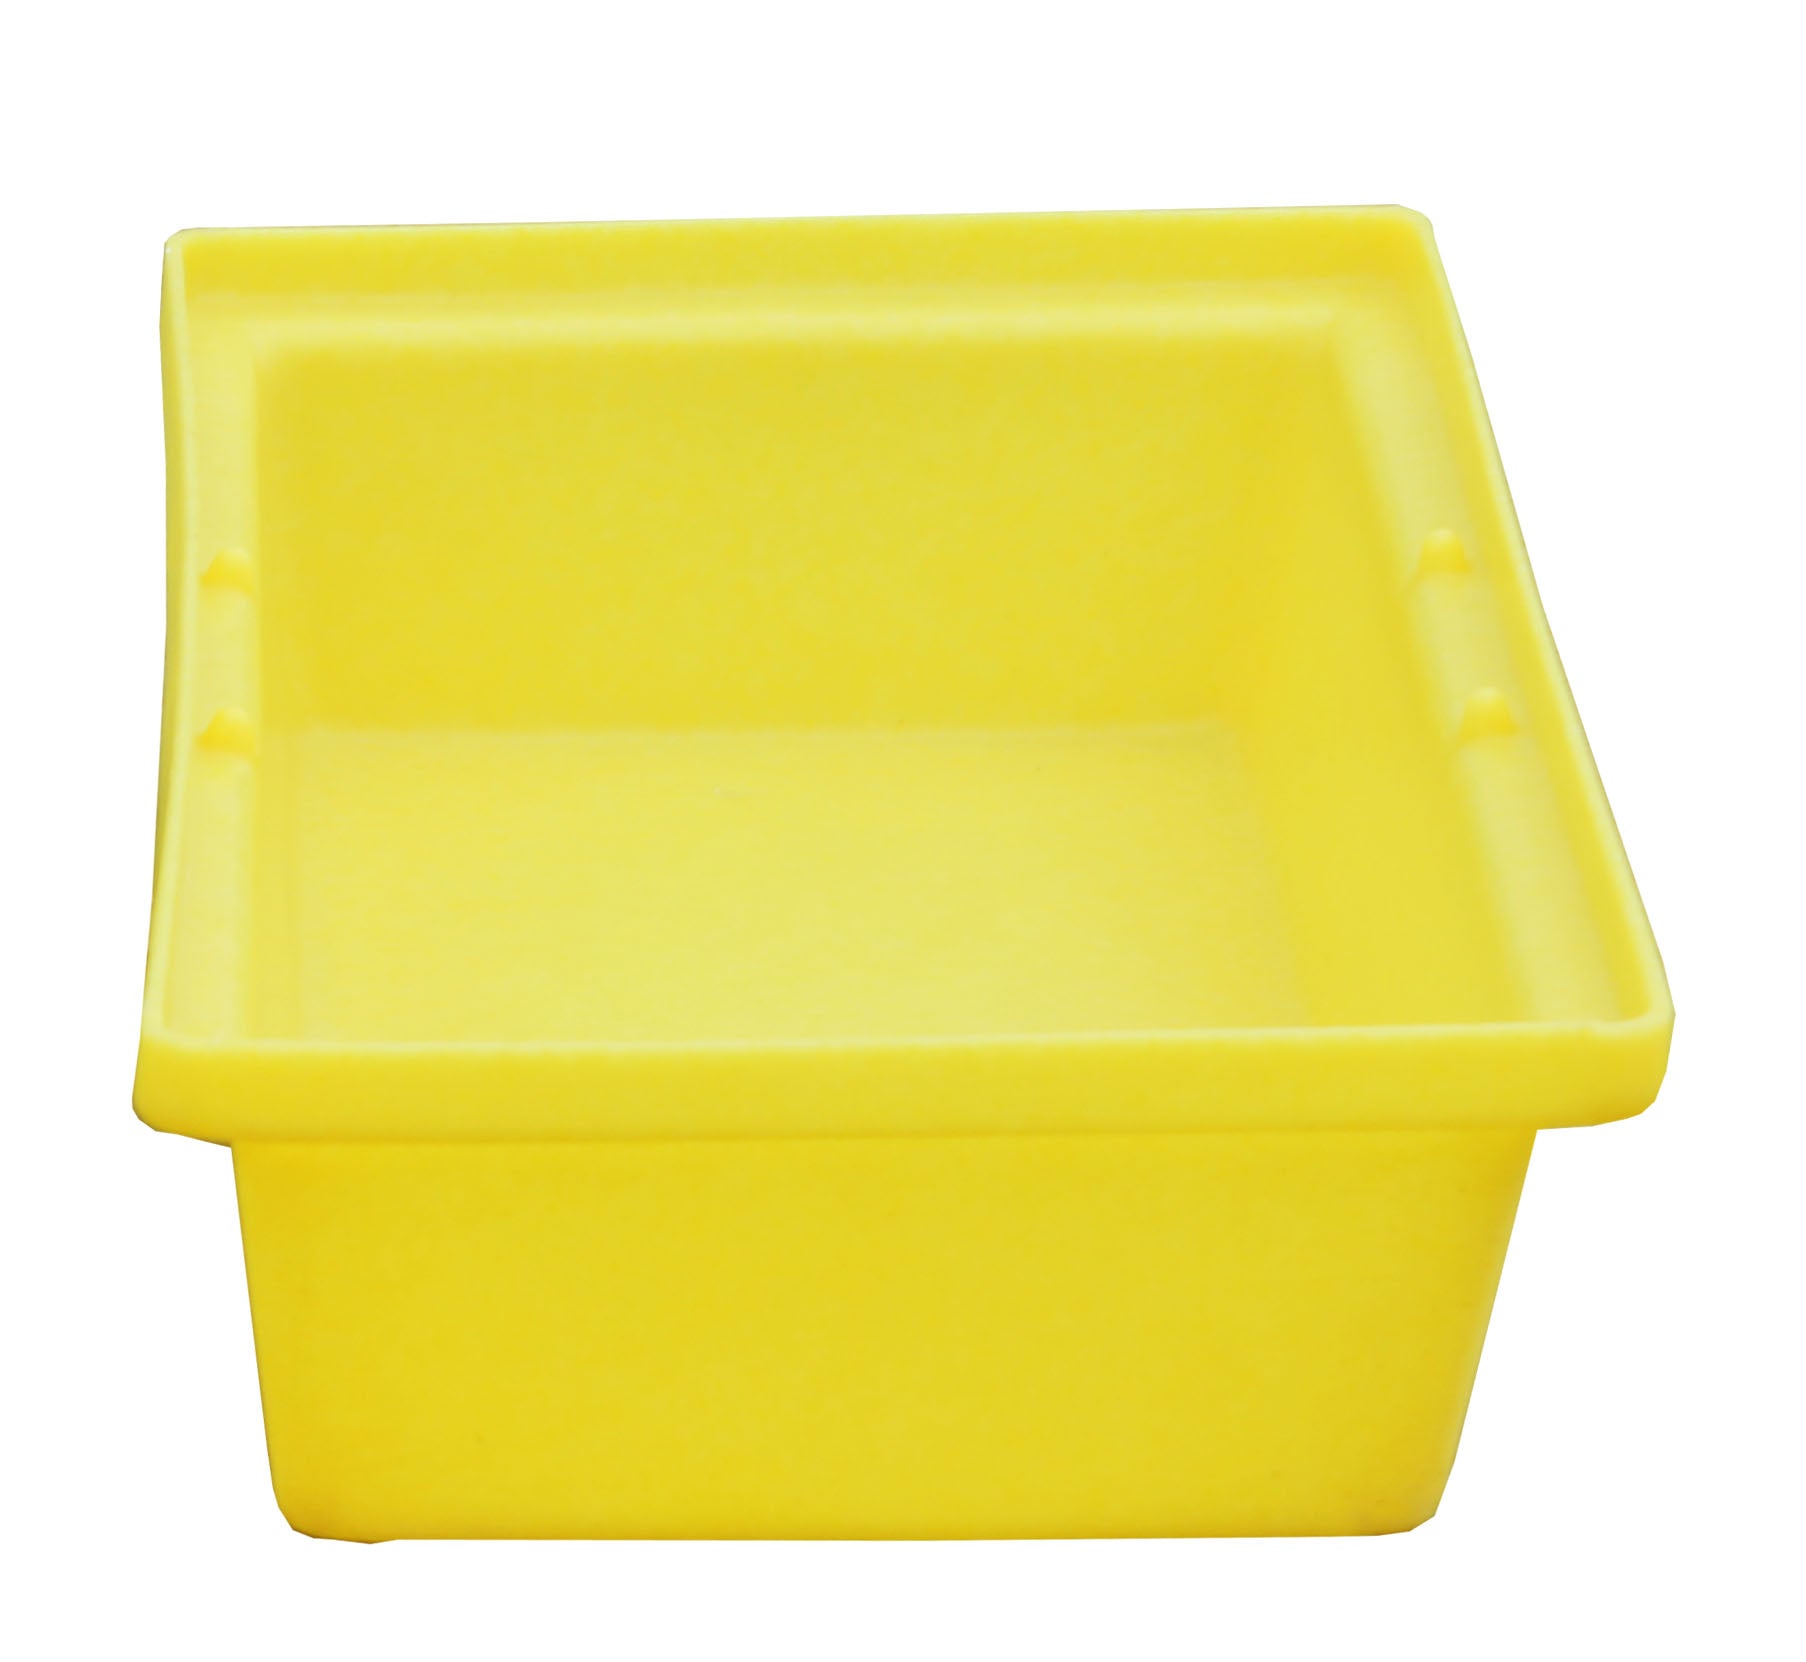 ST20BASE Drum Spill Drip Tray without Grid - 22 Litre Capacity Spill Pallet > Spill Drip Tray > Spill Containment > Spill Control > Romold > One Stop For Safety   